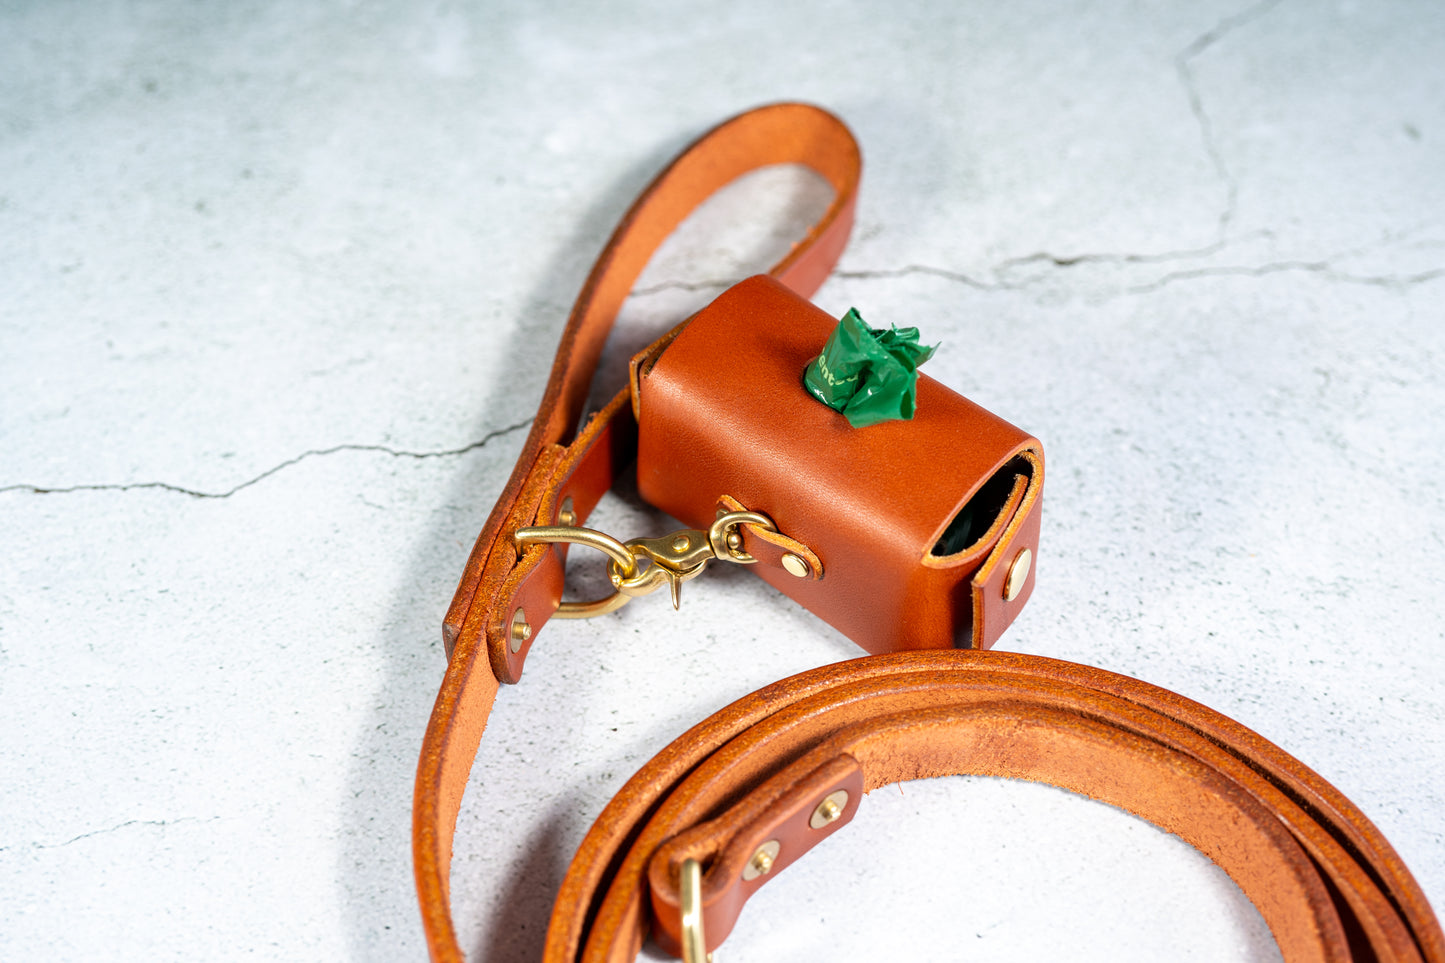 Viewed from the back of the dog poop bag holder attached to the chestnut leather leash.